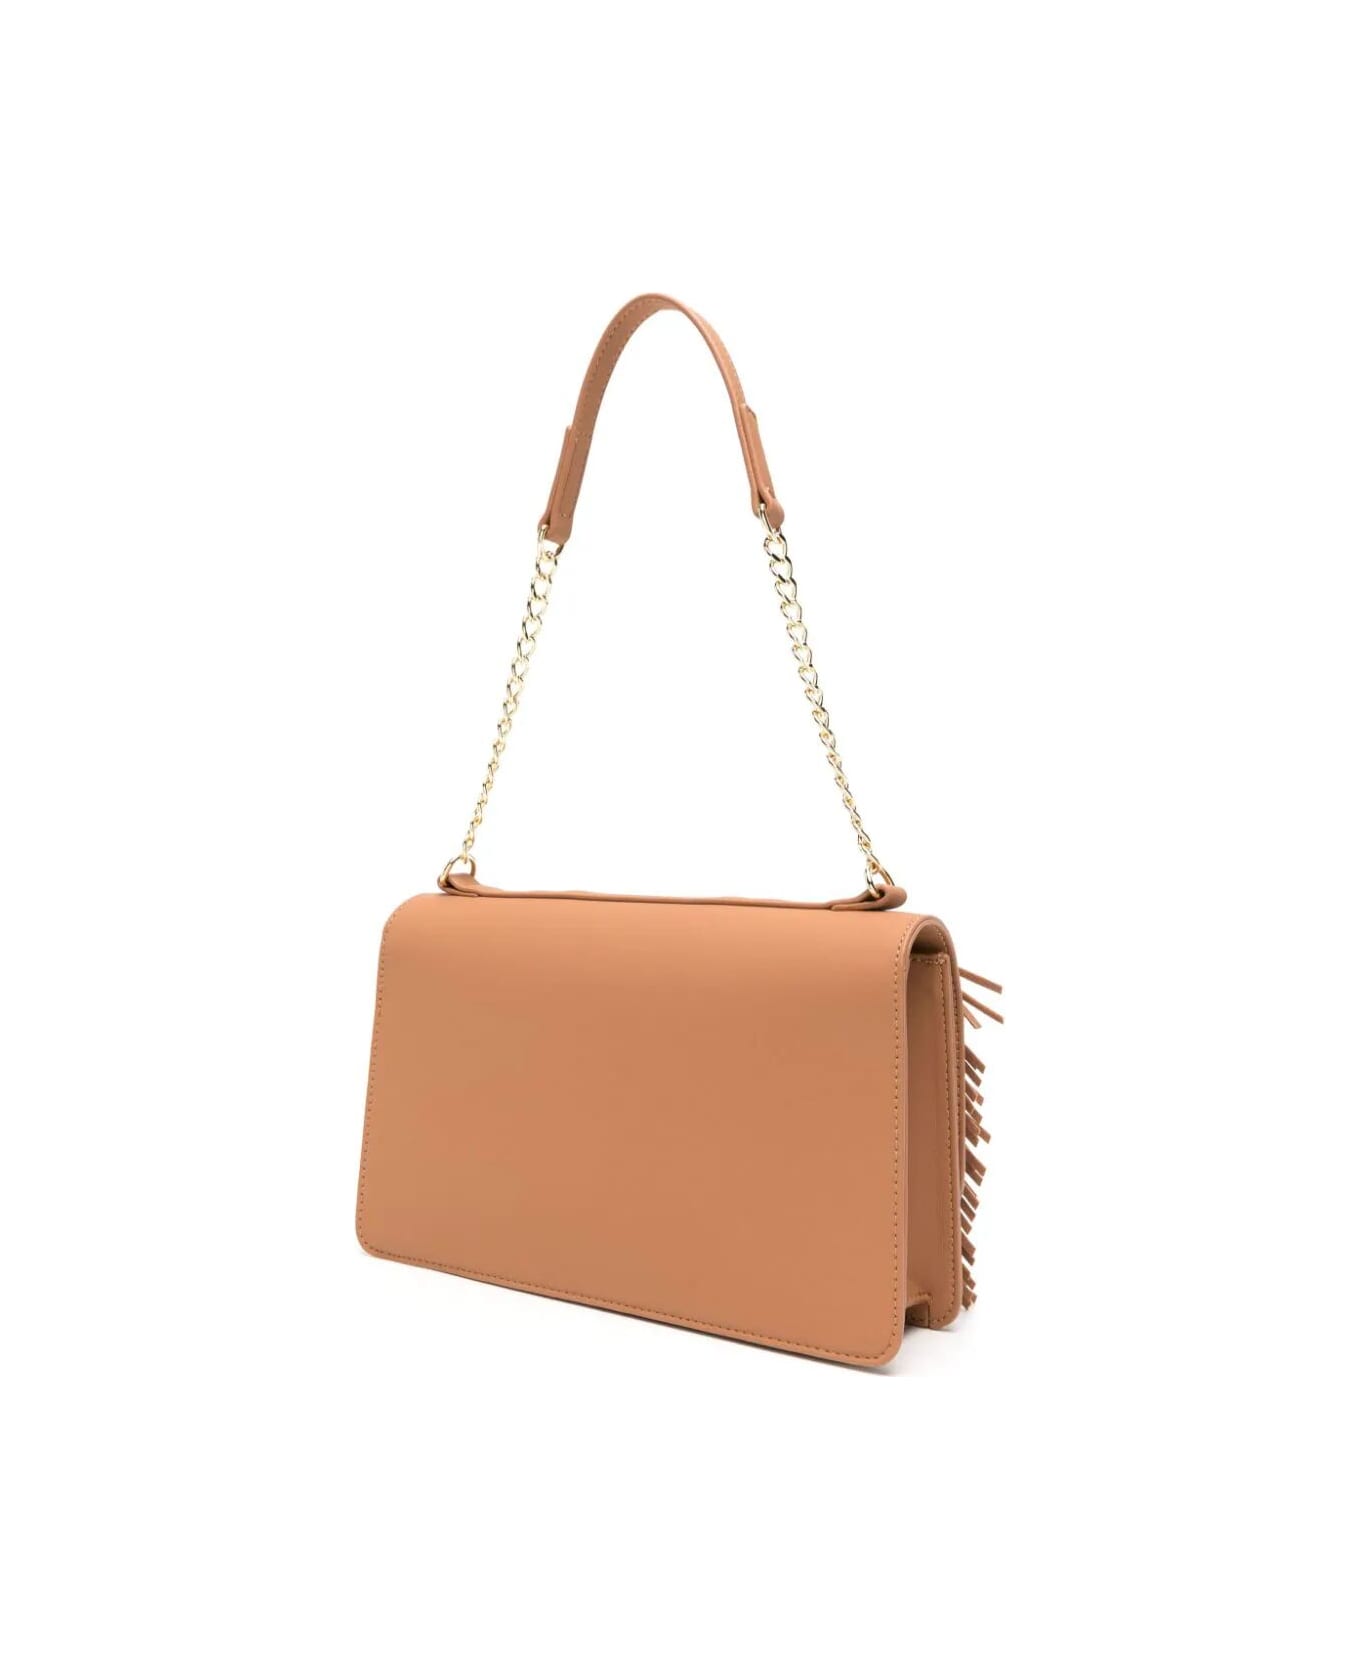 Love Moschino New Shiny Quitled Shoulder Bag - Camel ショルダーバッグ